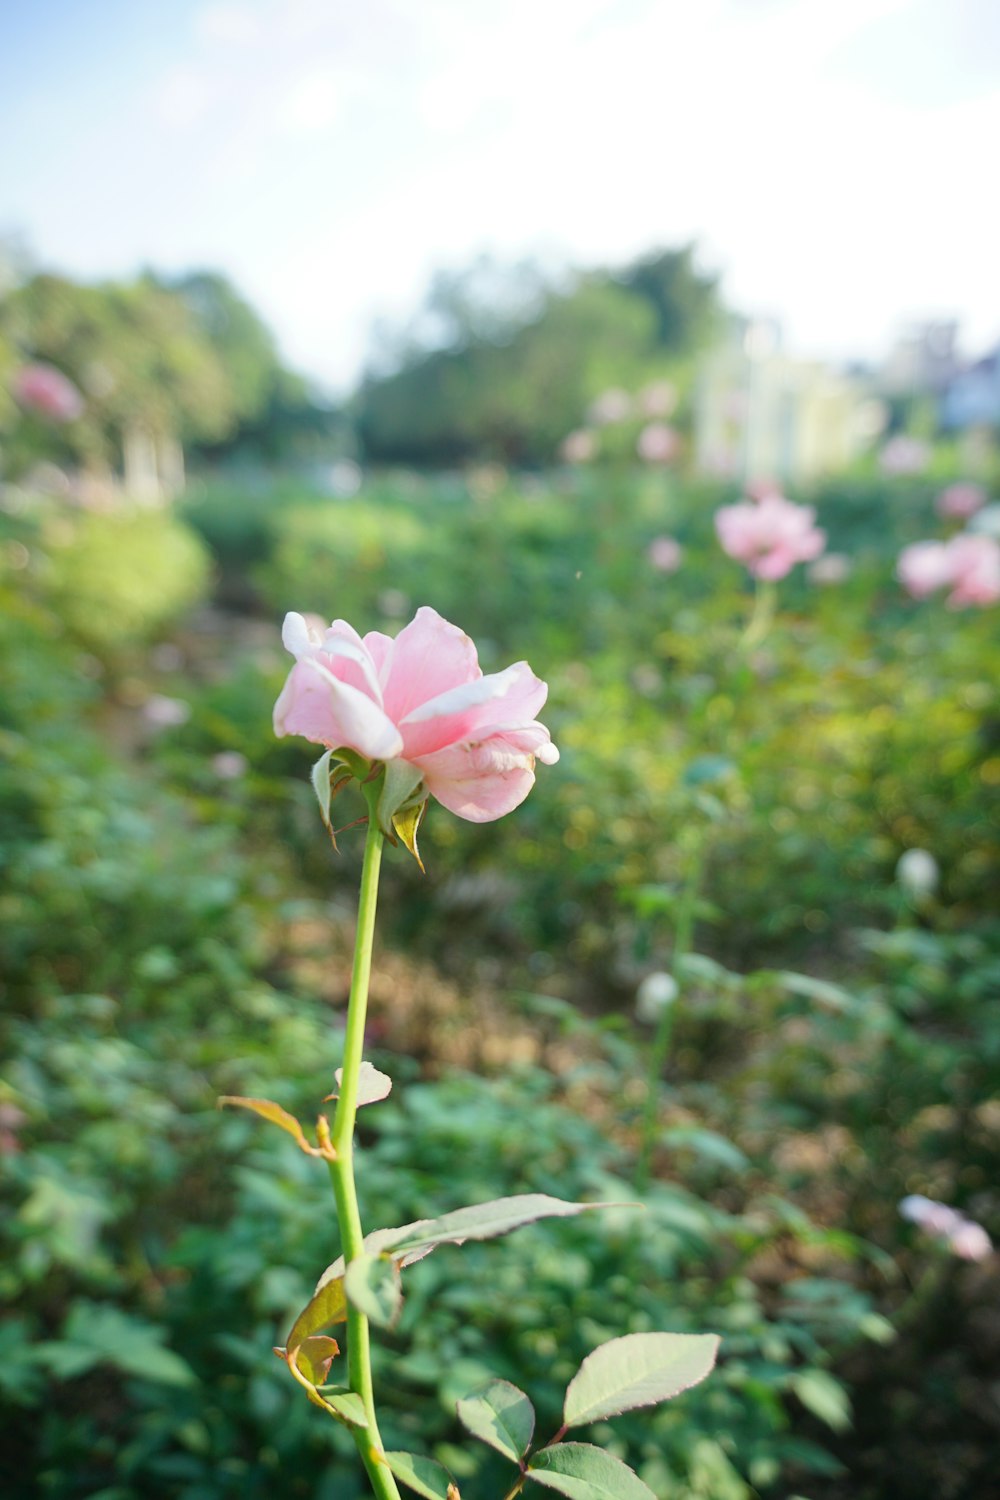 a single pink rose in a field of flowers